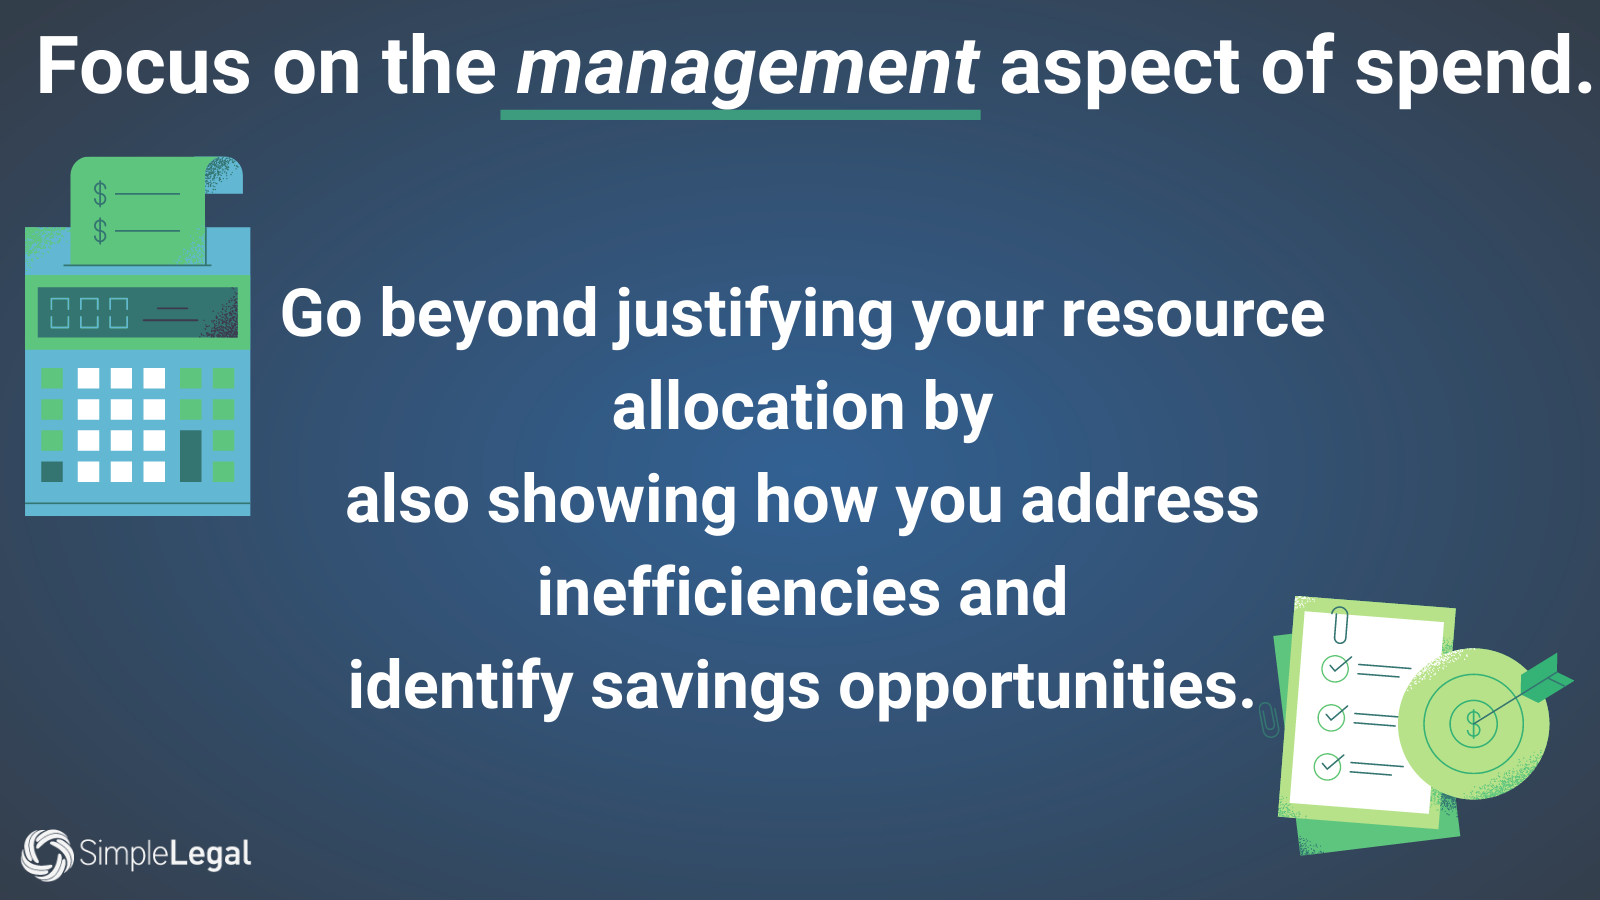 Focus On The Management Aspect Of Spend. Be Prepared To Justify Your Resource Allocation And Show How You Address Inefficiencies And Identify Savings Opportunities. (1)